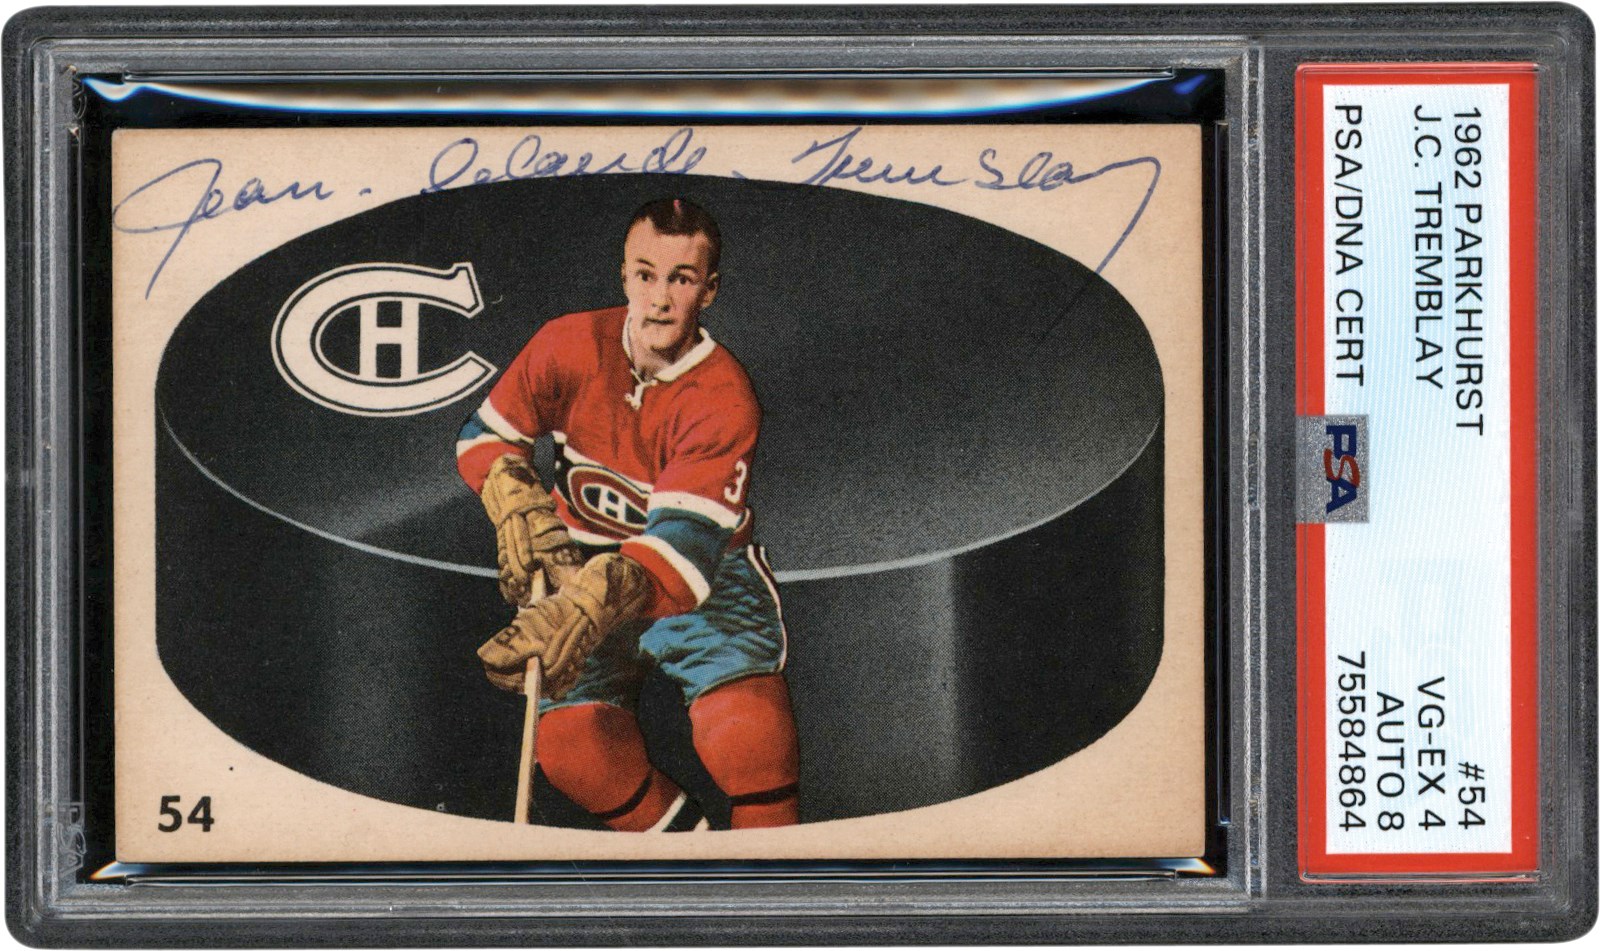 - 1962 Parkhurst Hockey #54 J.C. Tremblay Signed Rookie Card PSA VG-EX 4 Auto 8 (Only Known Example)